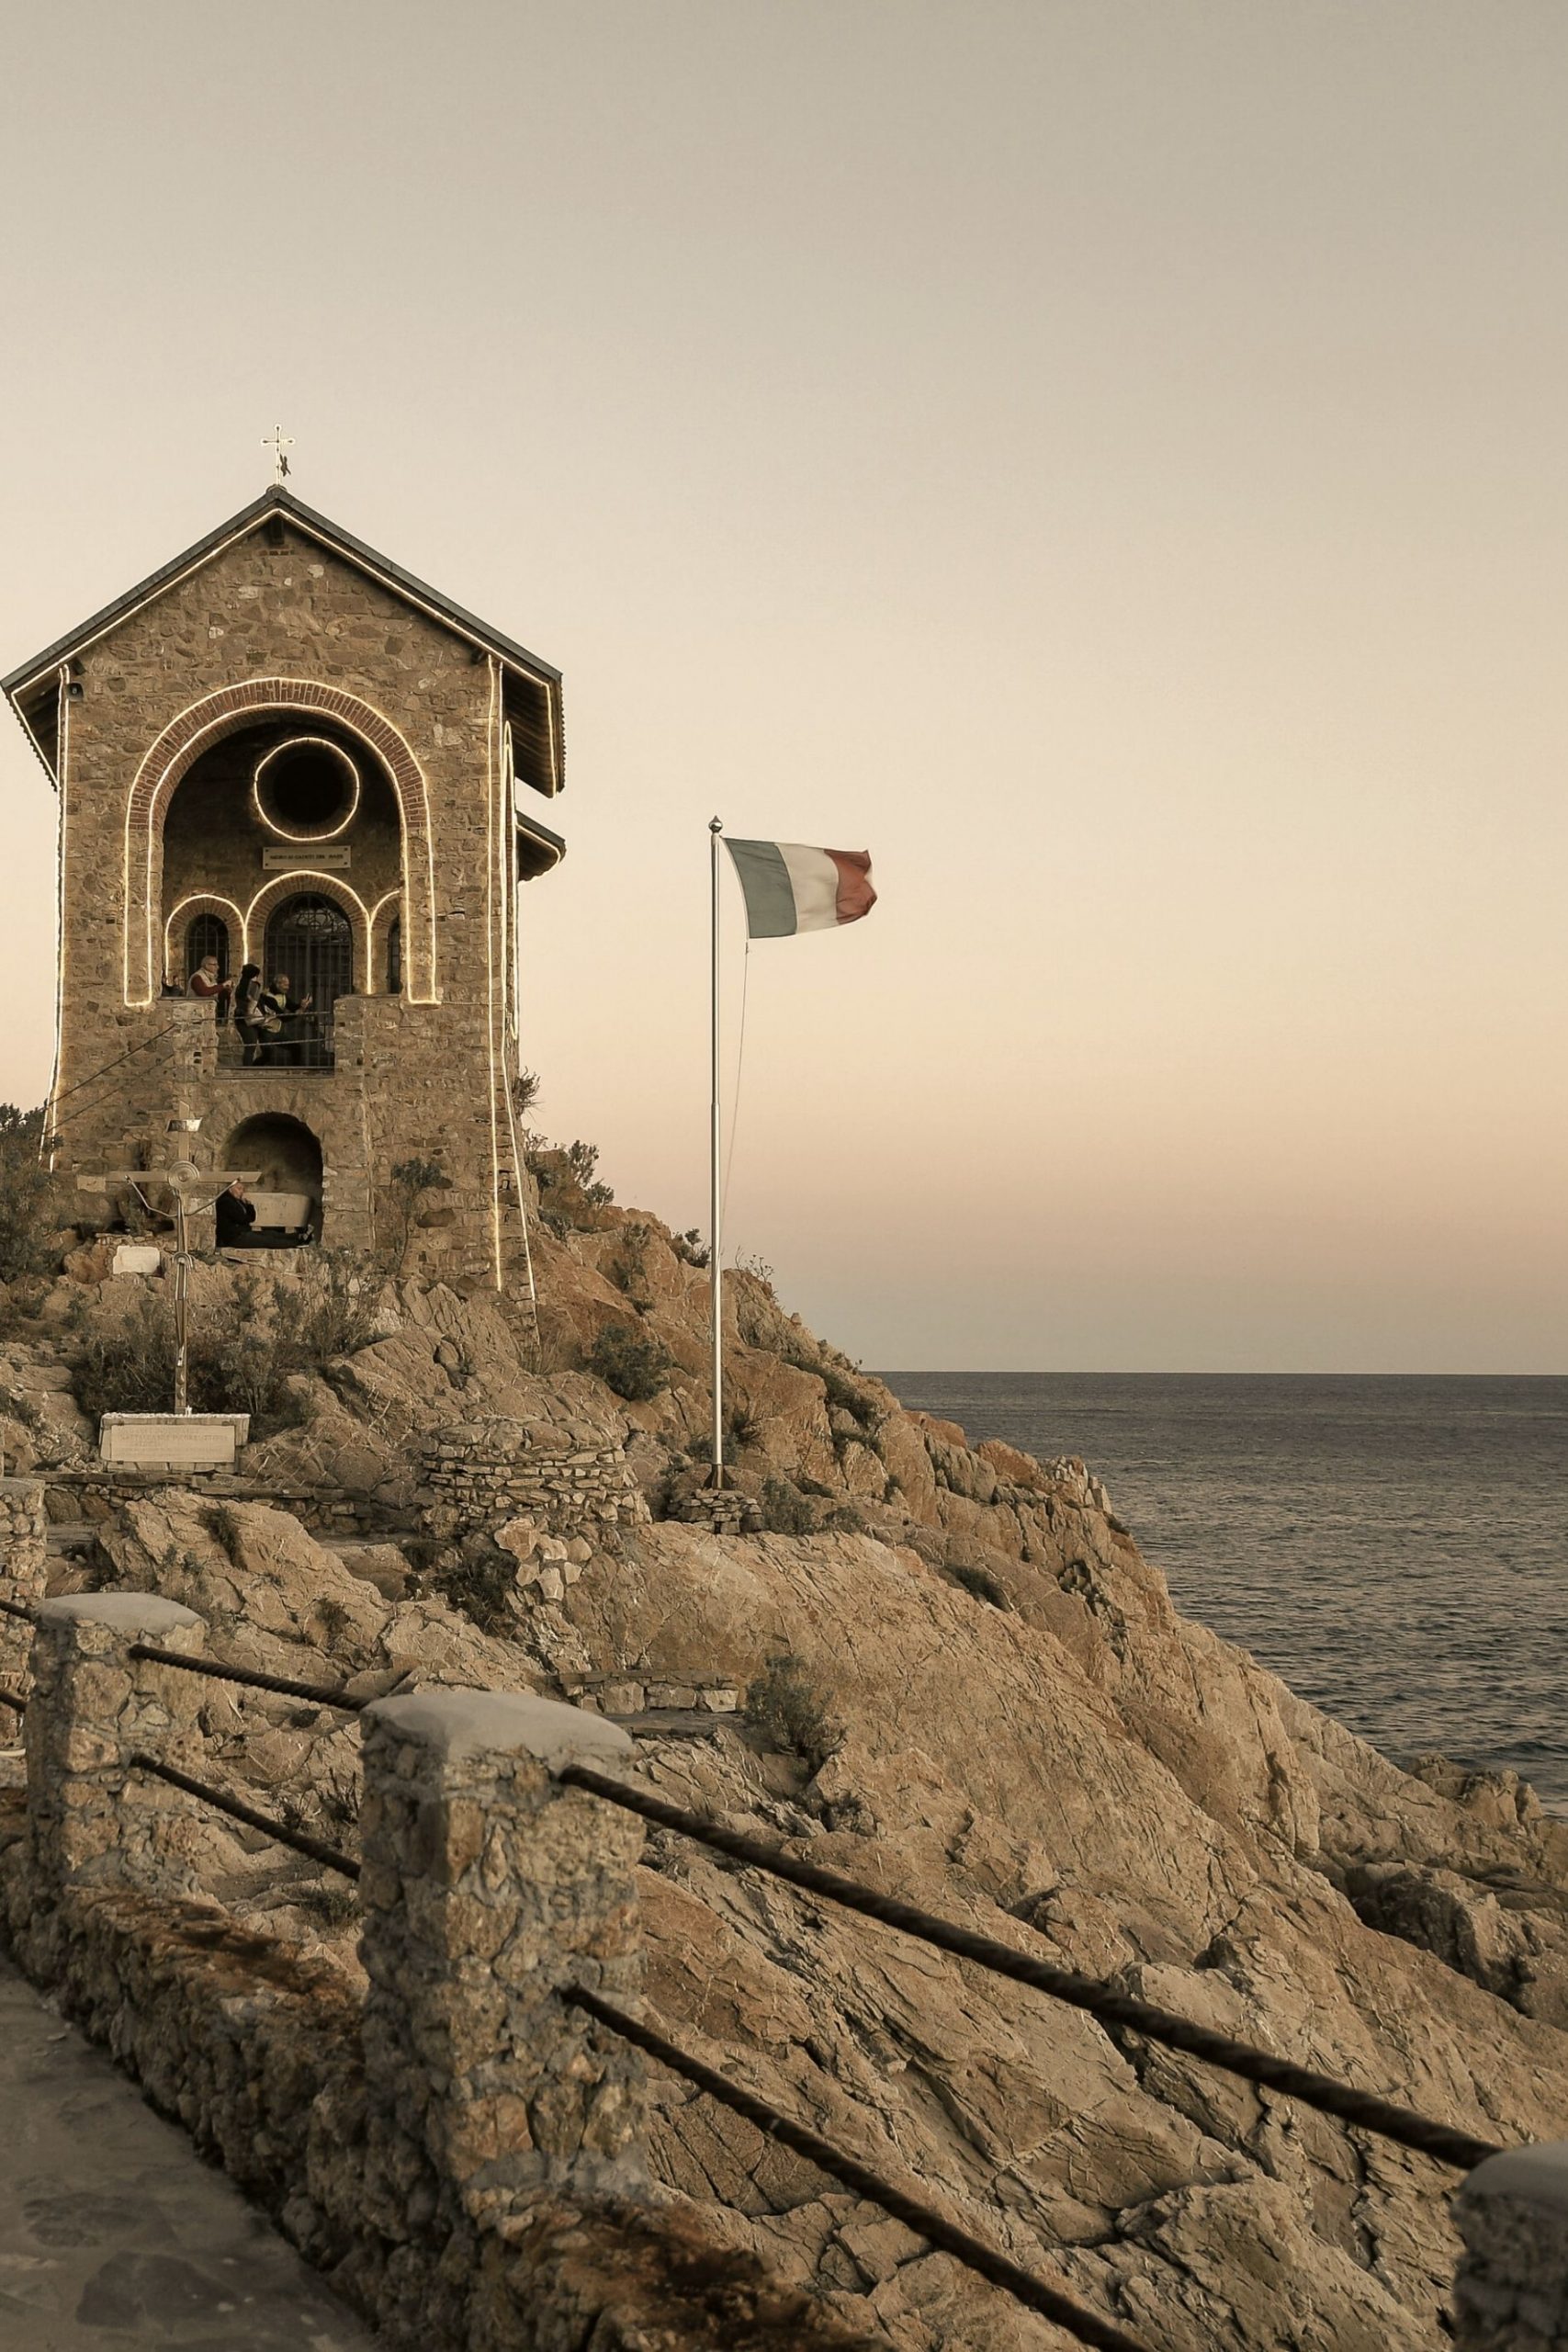 Panoramic sunset at the Cappelletta in the port of Alassio, also known as "Stella Maris chapel".